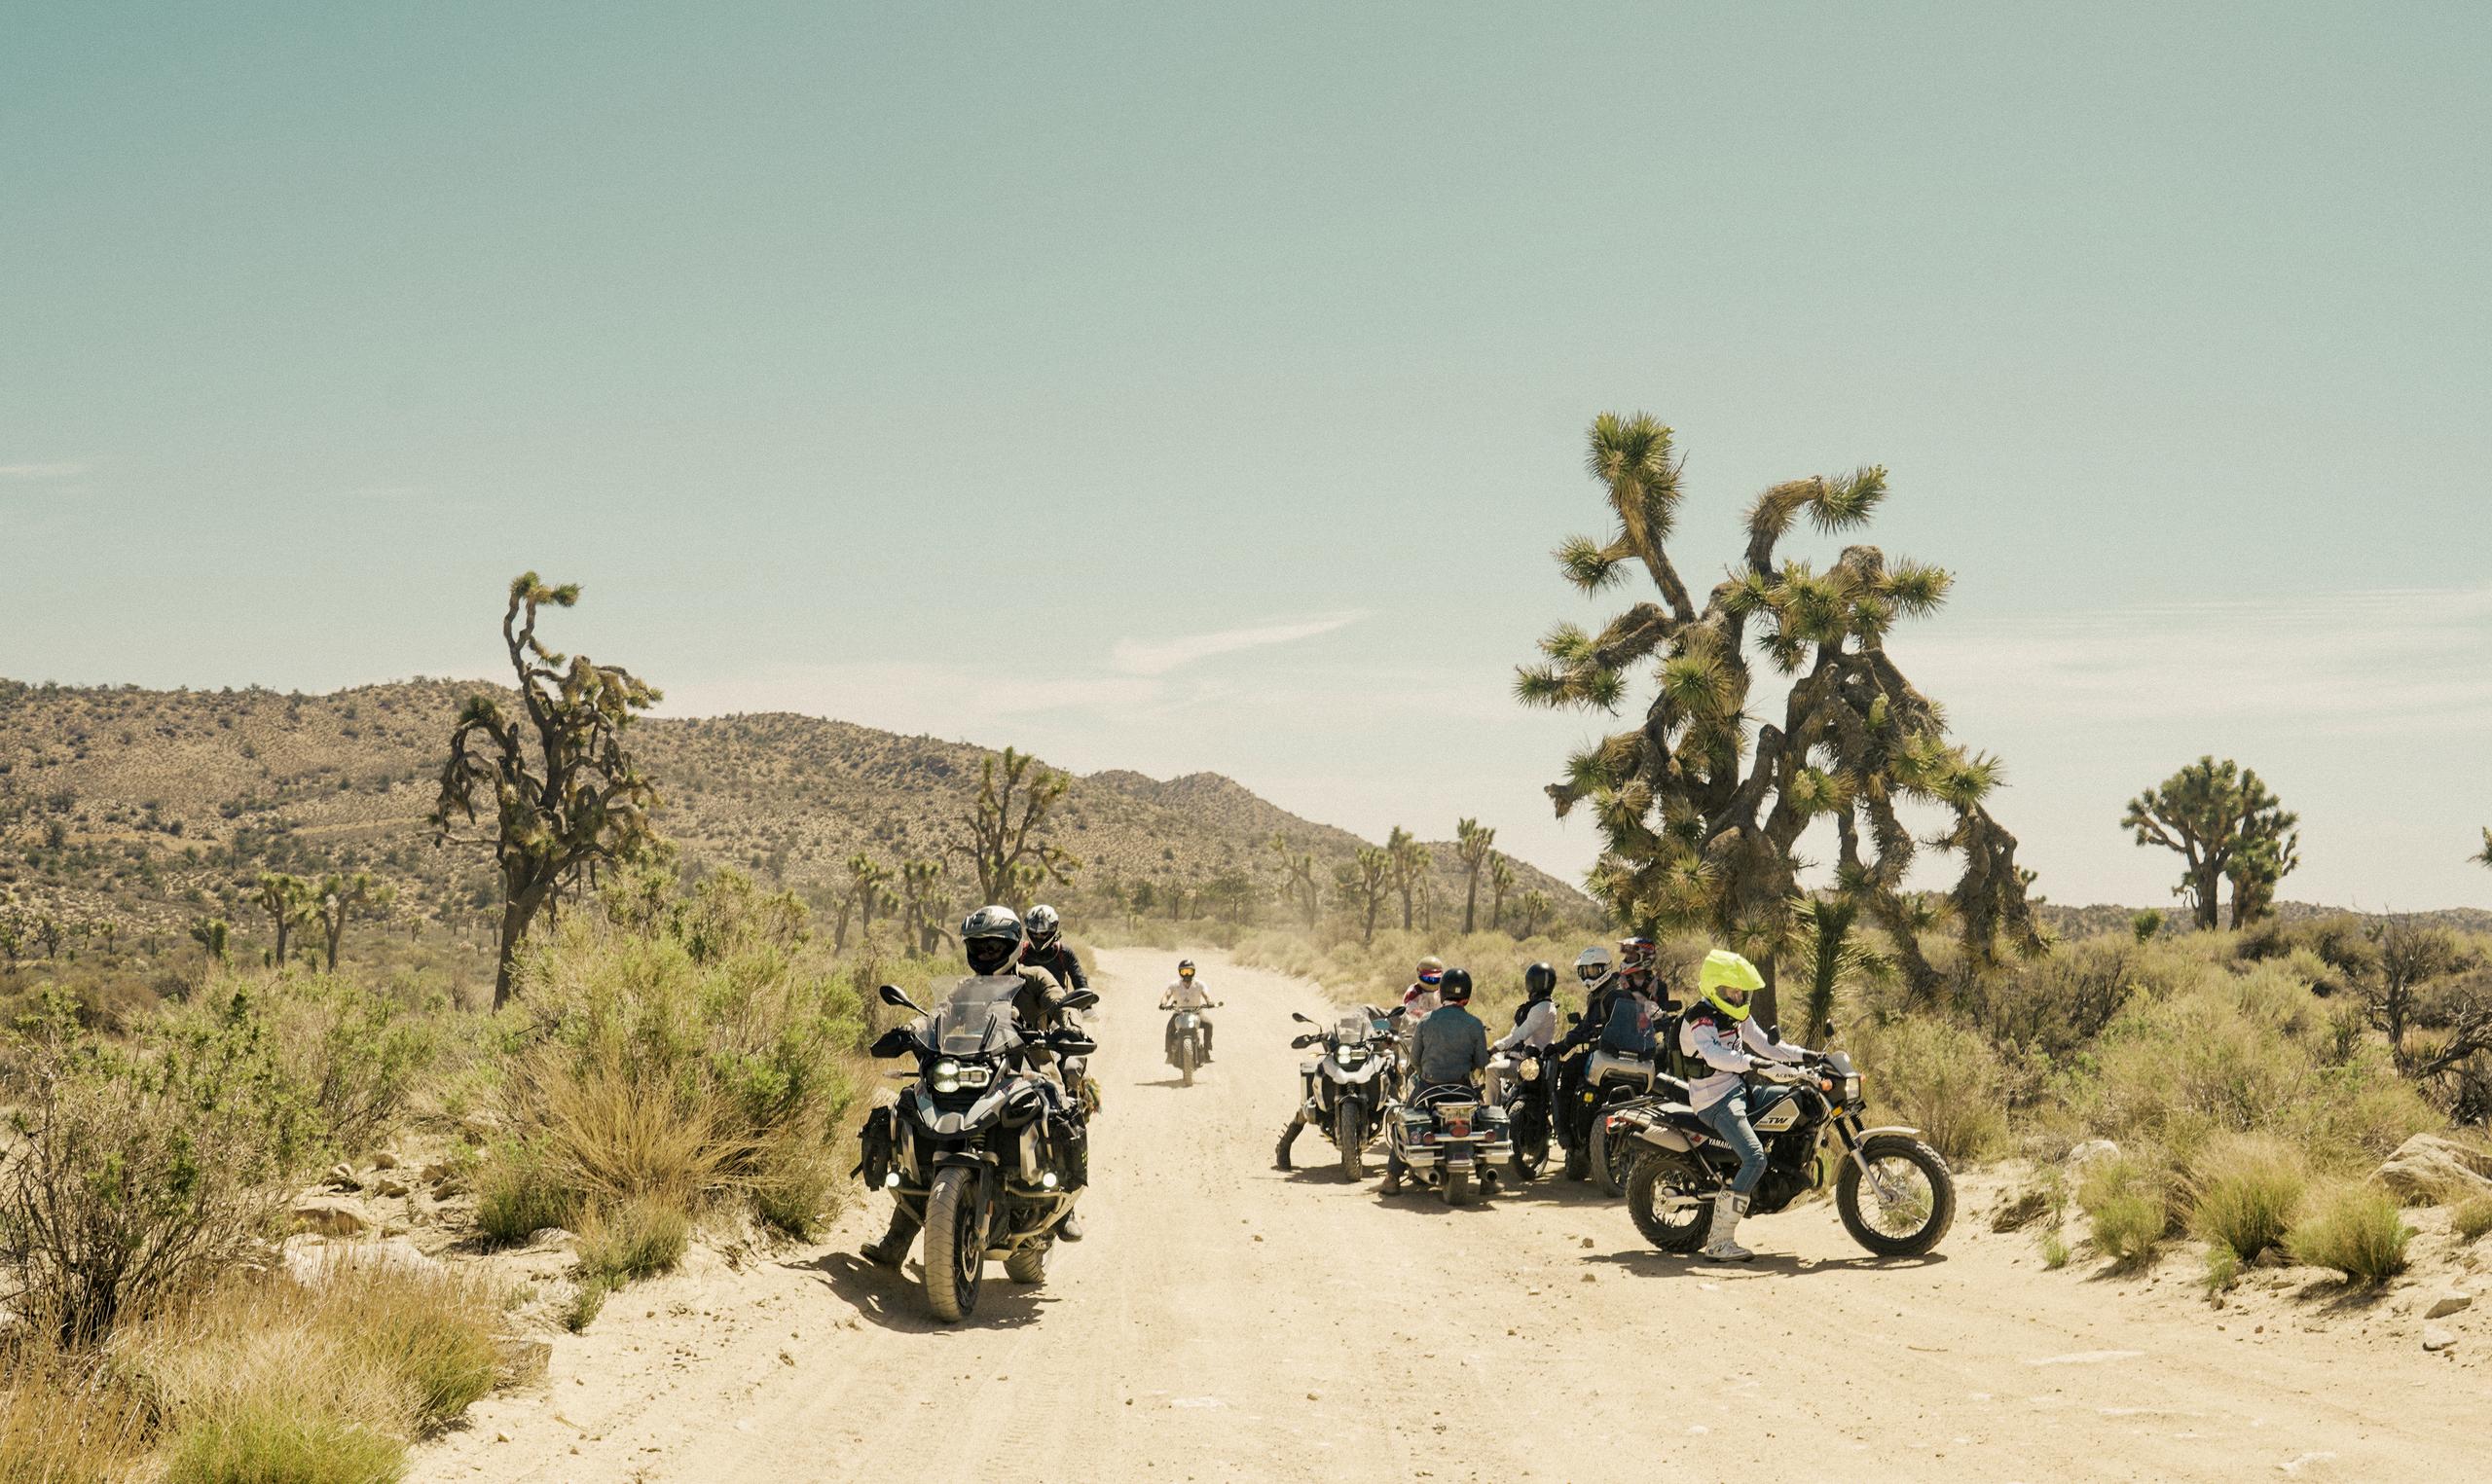 Motorcyclists on dirt path in Joshua Tree